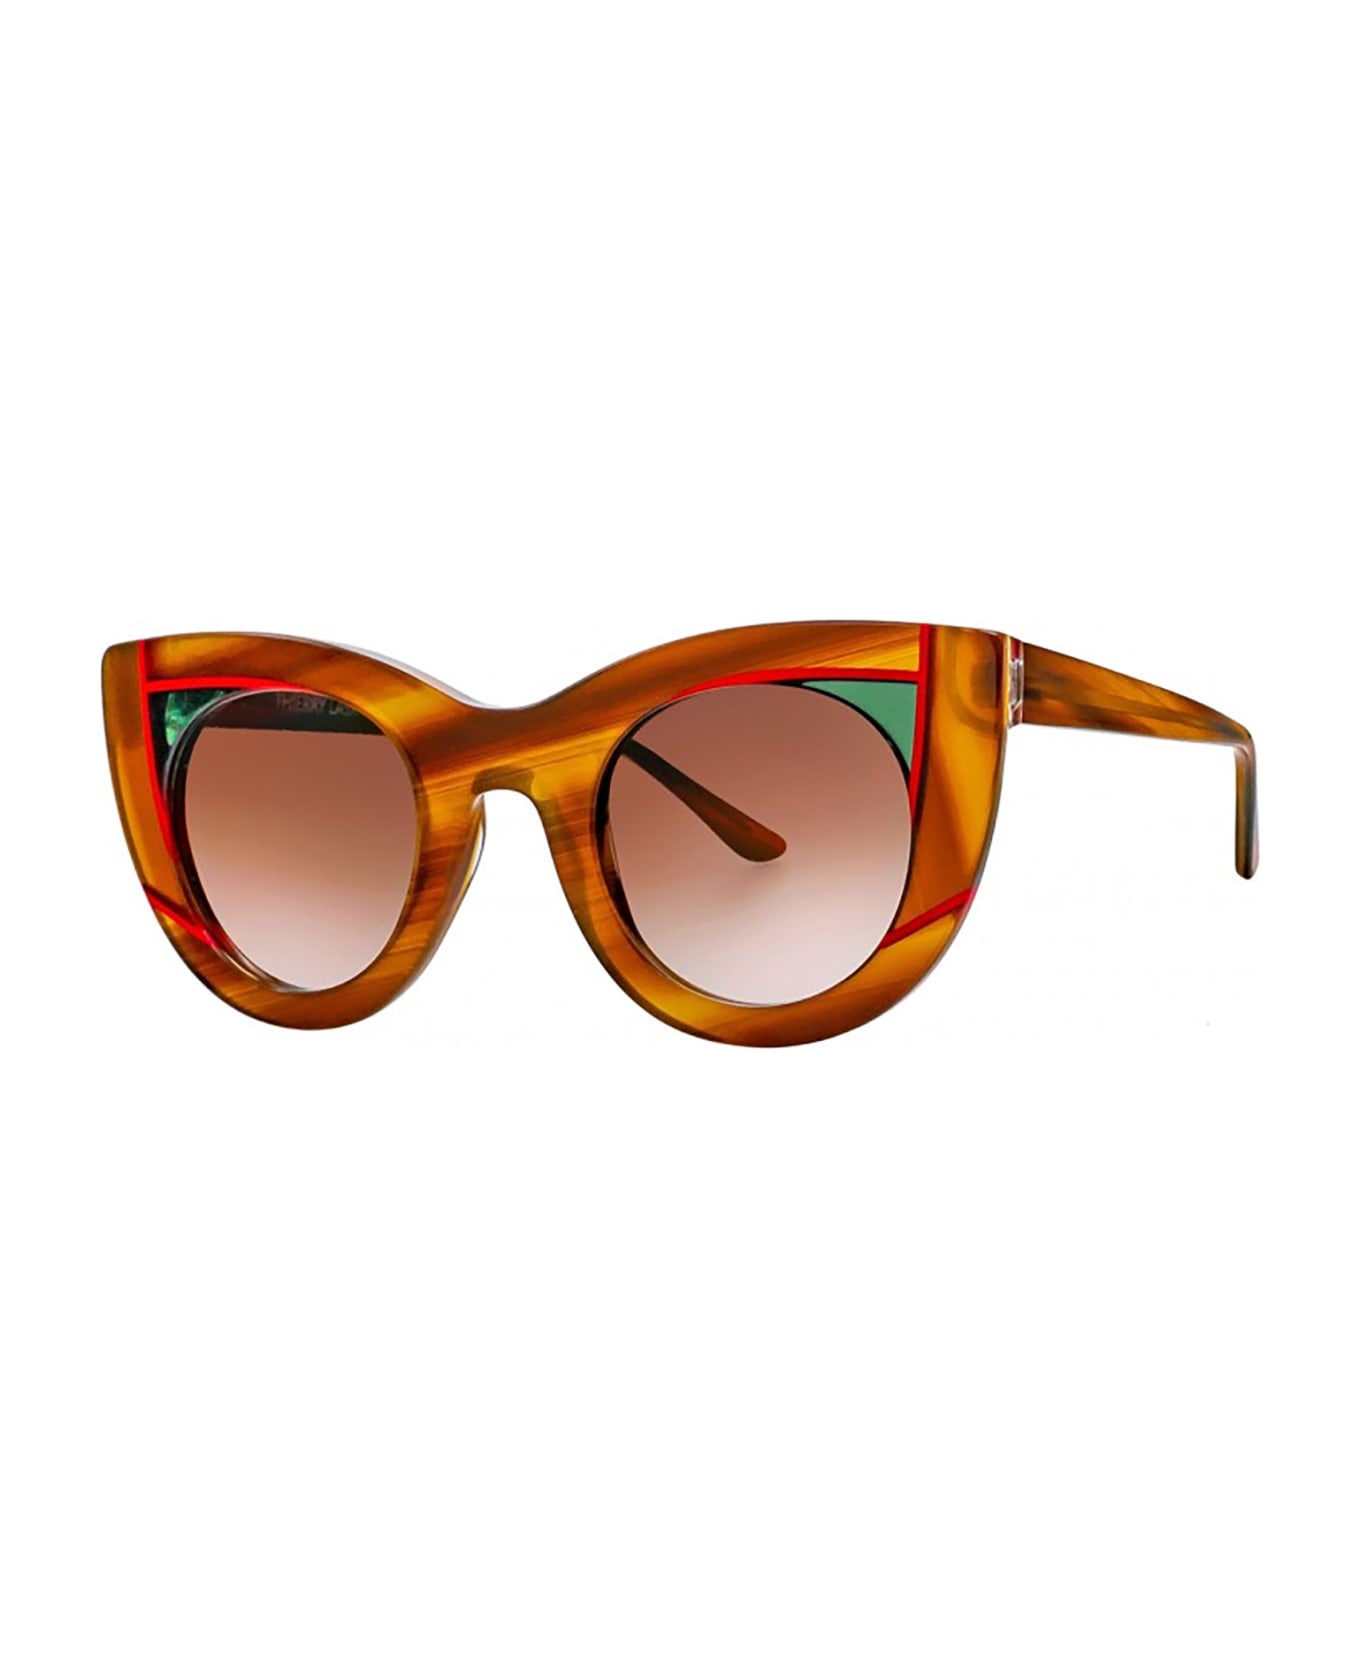 Thierry Lasry WAVVVY Sunglasses